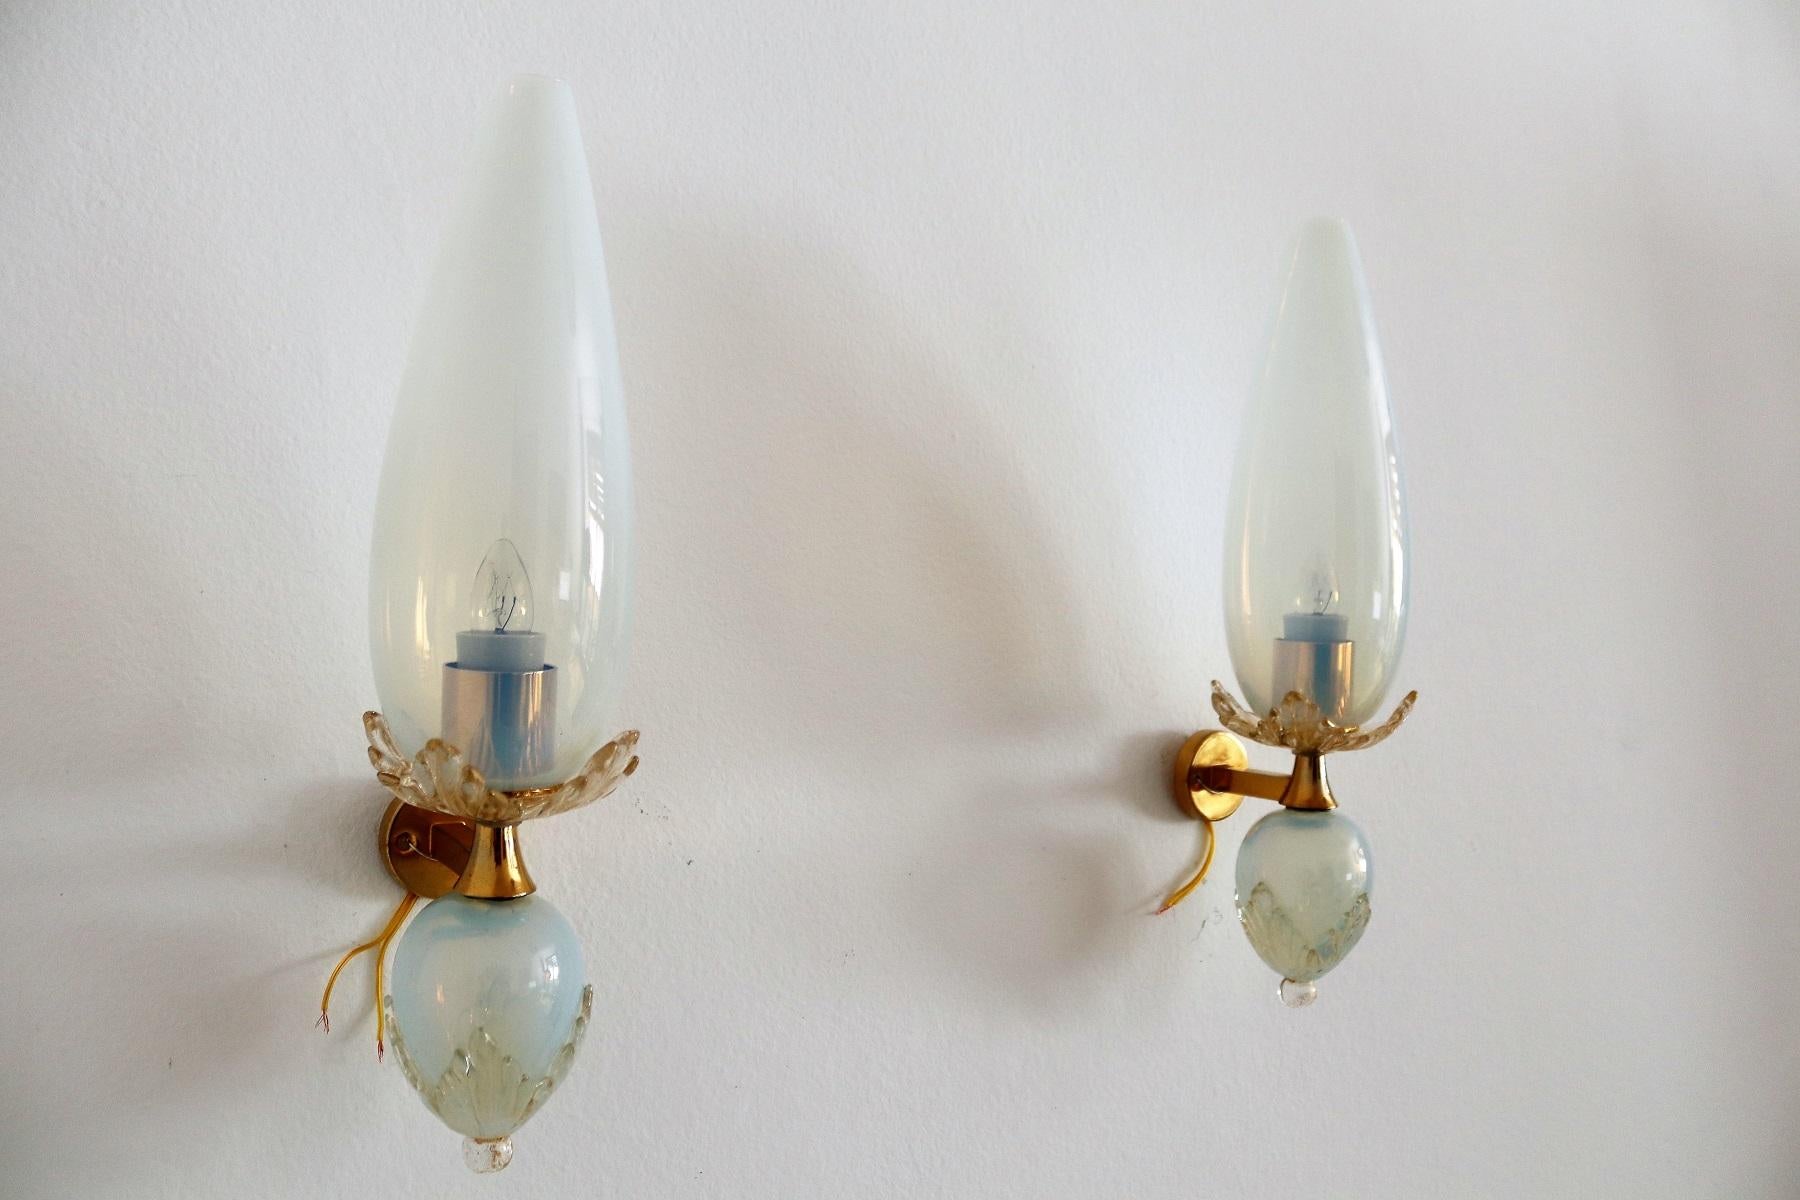 Italian Midcentury Handcrafted Opaline Murano Glass Wall Sconces by Venini 1970s 2